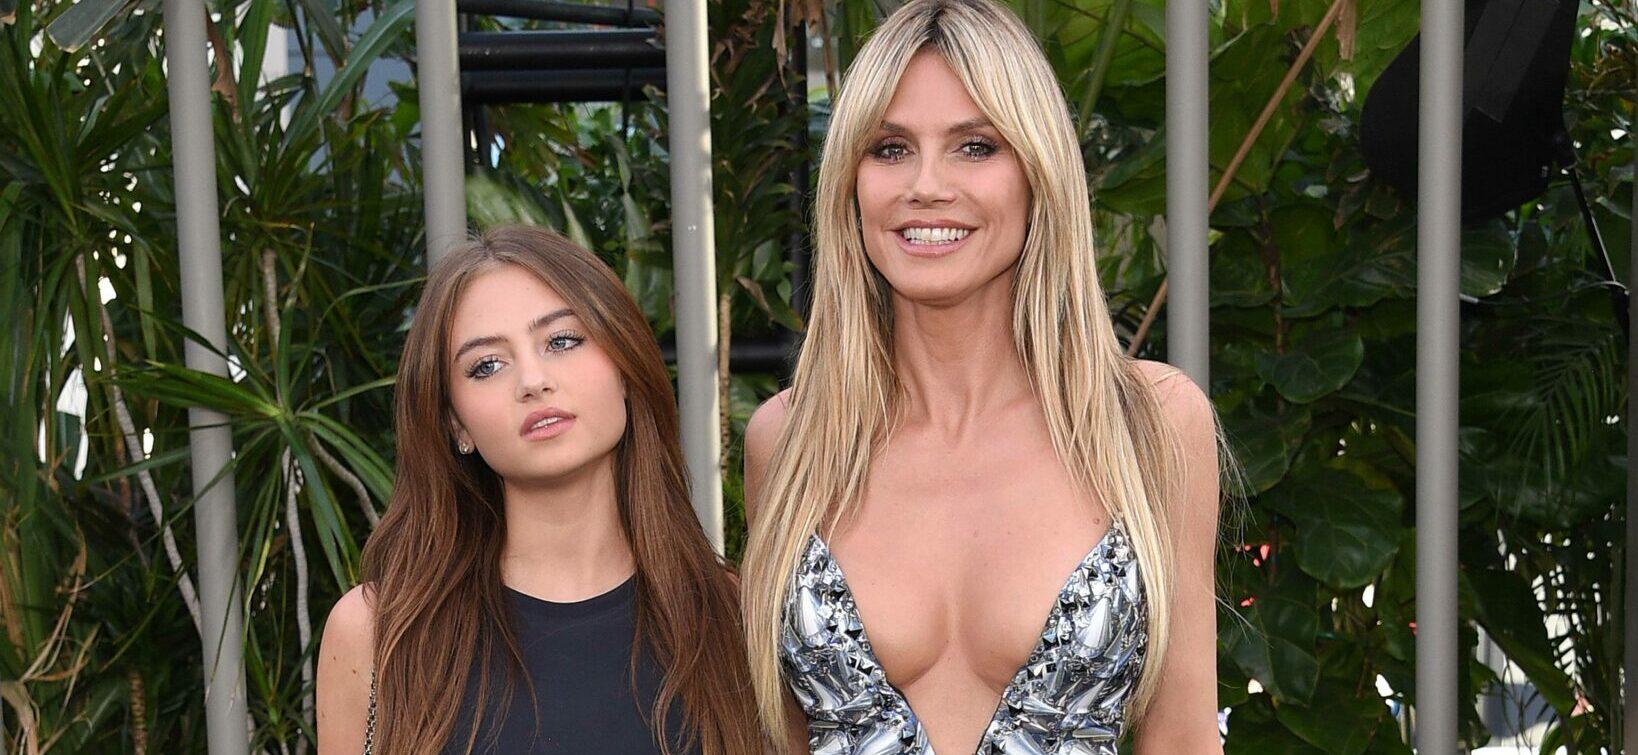 Heidi Klum’s Daughter Leni Getting Ready To Start New Chapter In Fashion Career